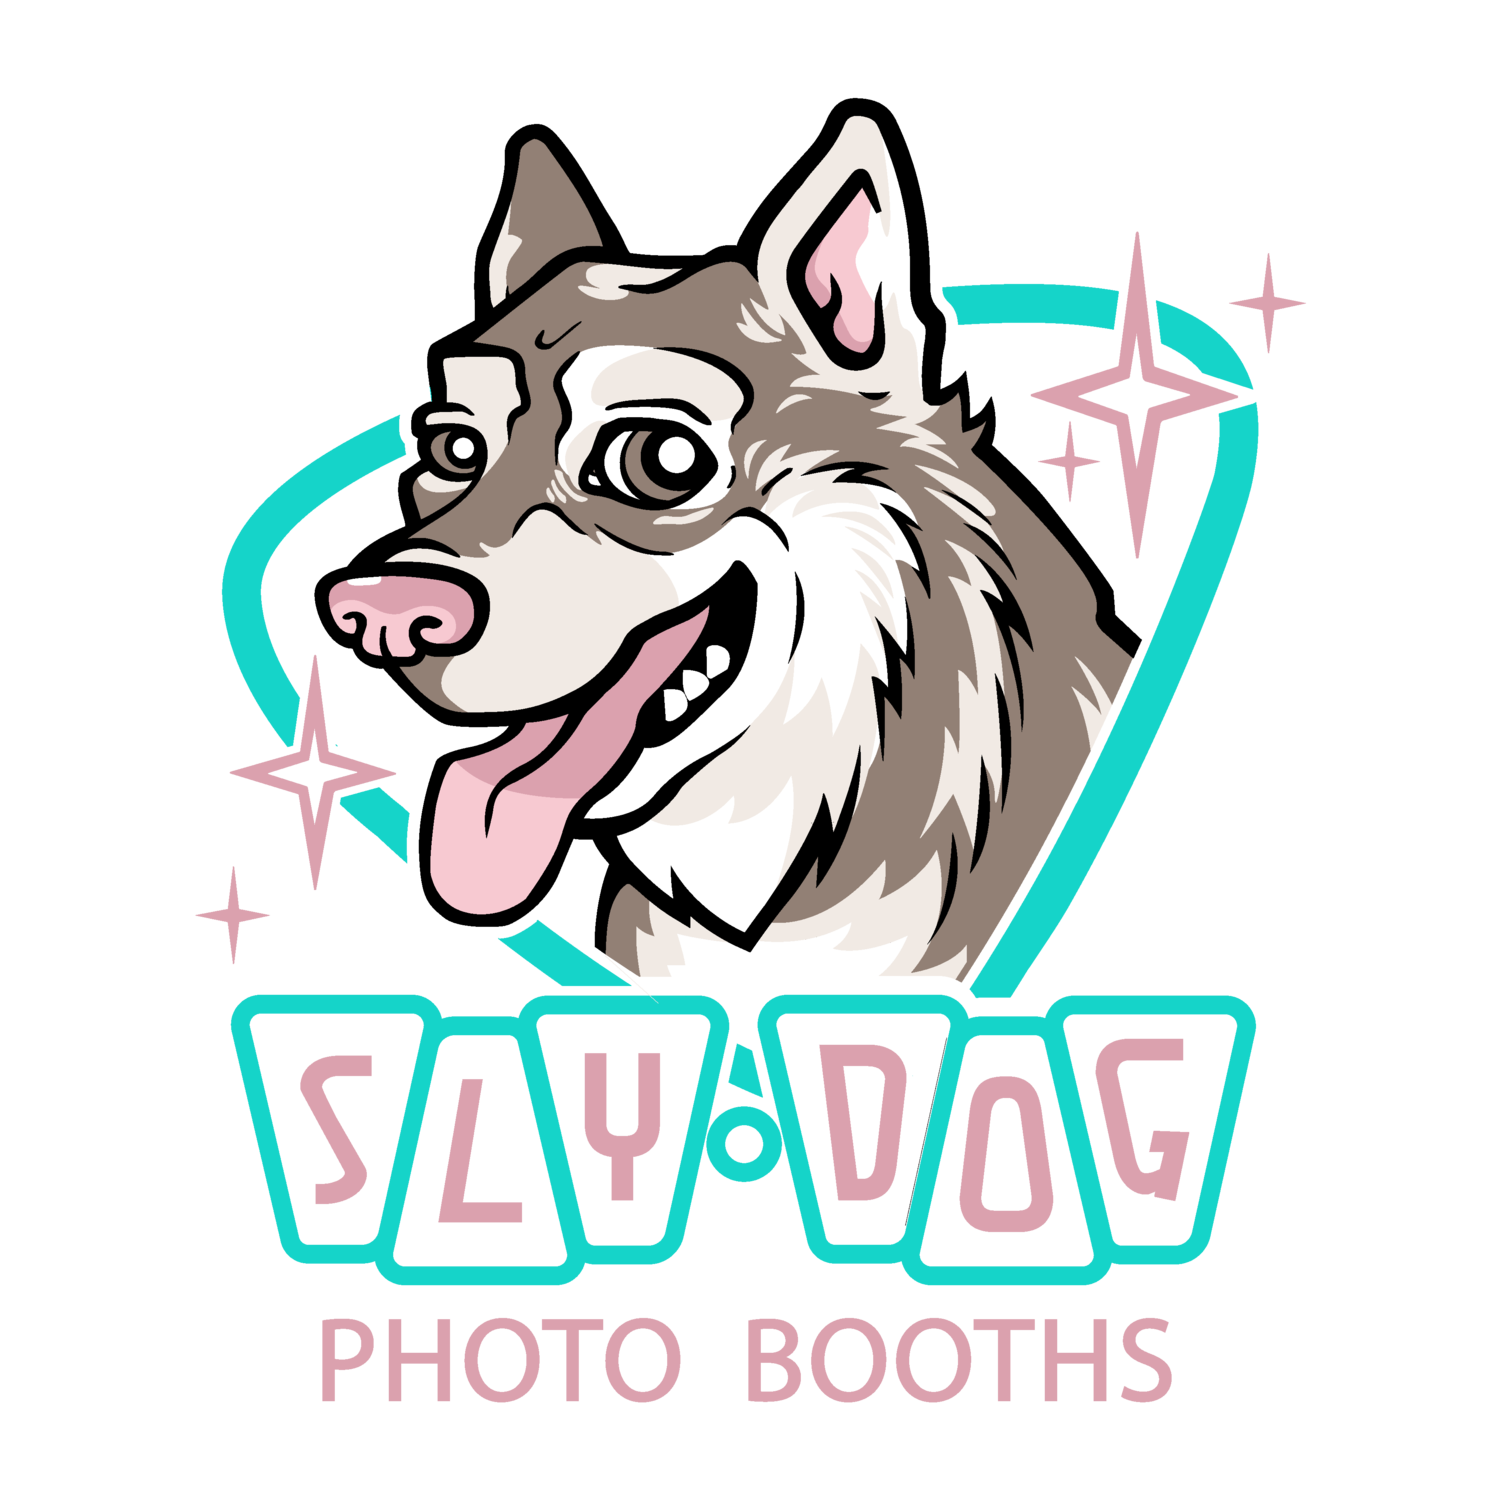 Sly Dog Photo Booths